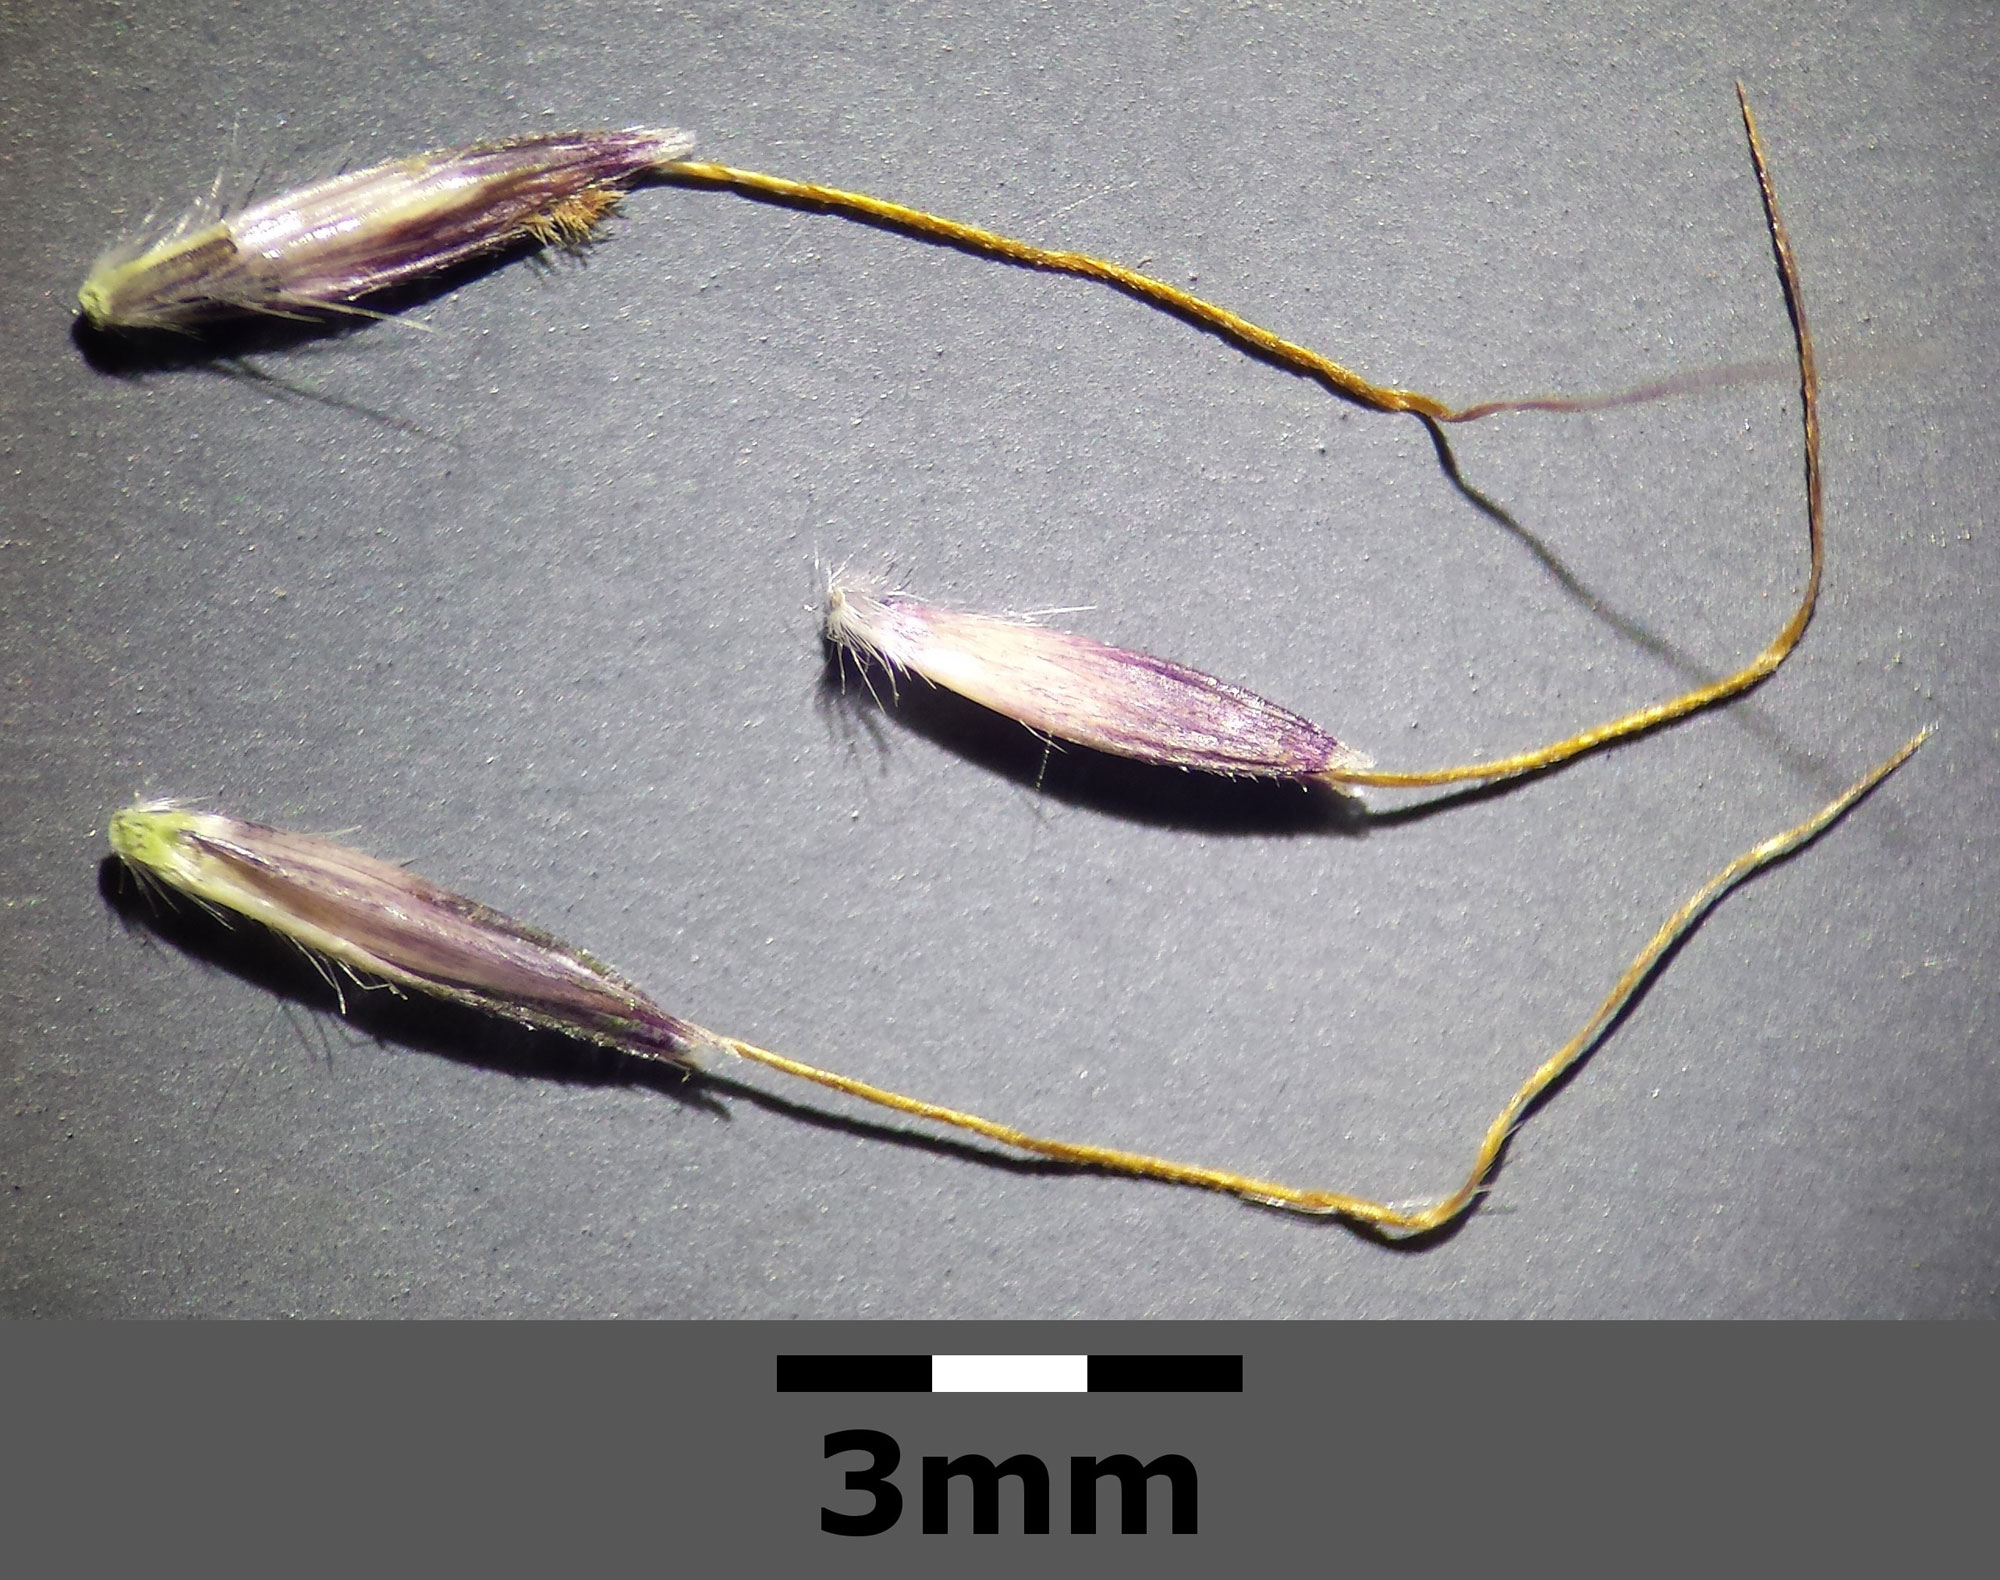 Photograph showing three spikelets of yellow bluestem. Each spikelet is purplish in color with sparse hairs and a single, twisted awn extending from its apex. 